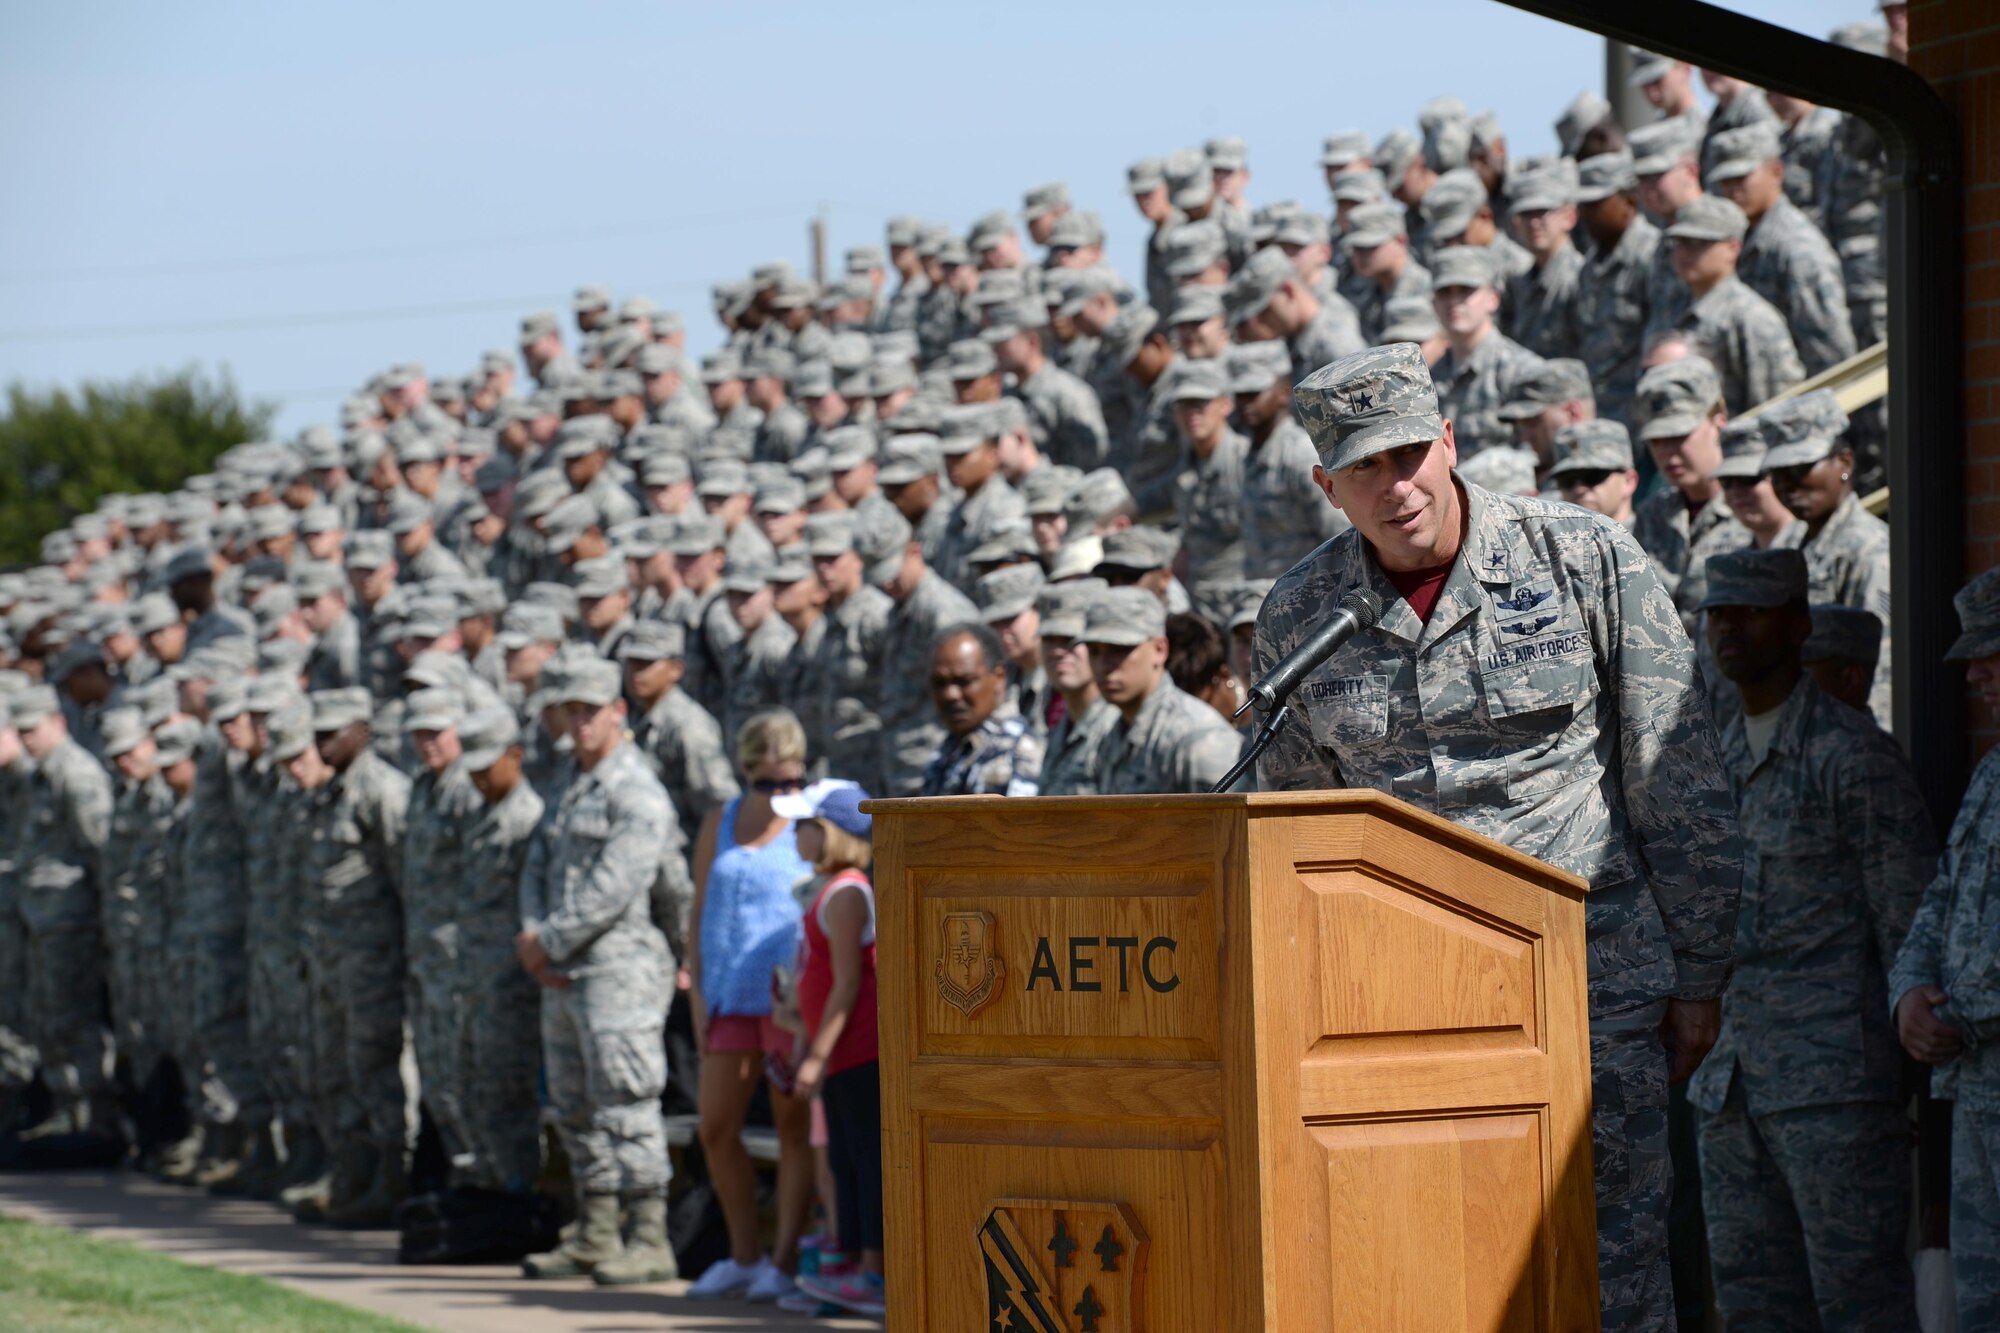 Brig. Gen. Patrick Doherty, 82nd Training Wing commander, gives a speech in remembrance of POW and MIA military members throughout military at Sheppard Air Force Base, Texas, Sept. 9, 2016. More than 83,000 Americans remain missing from WWII, the Korean War, the Cold War, the Gulf Wars and other conflicts. Of those missing, 41,000 of the missing are presumed lost at sea. (U.S. Air Force photo by Senior Airman Kyle E. Gese)